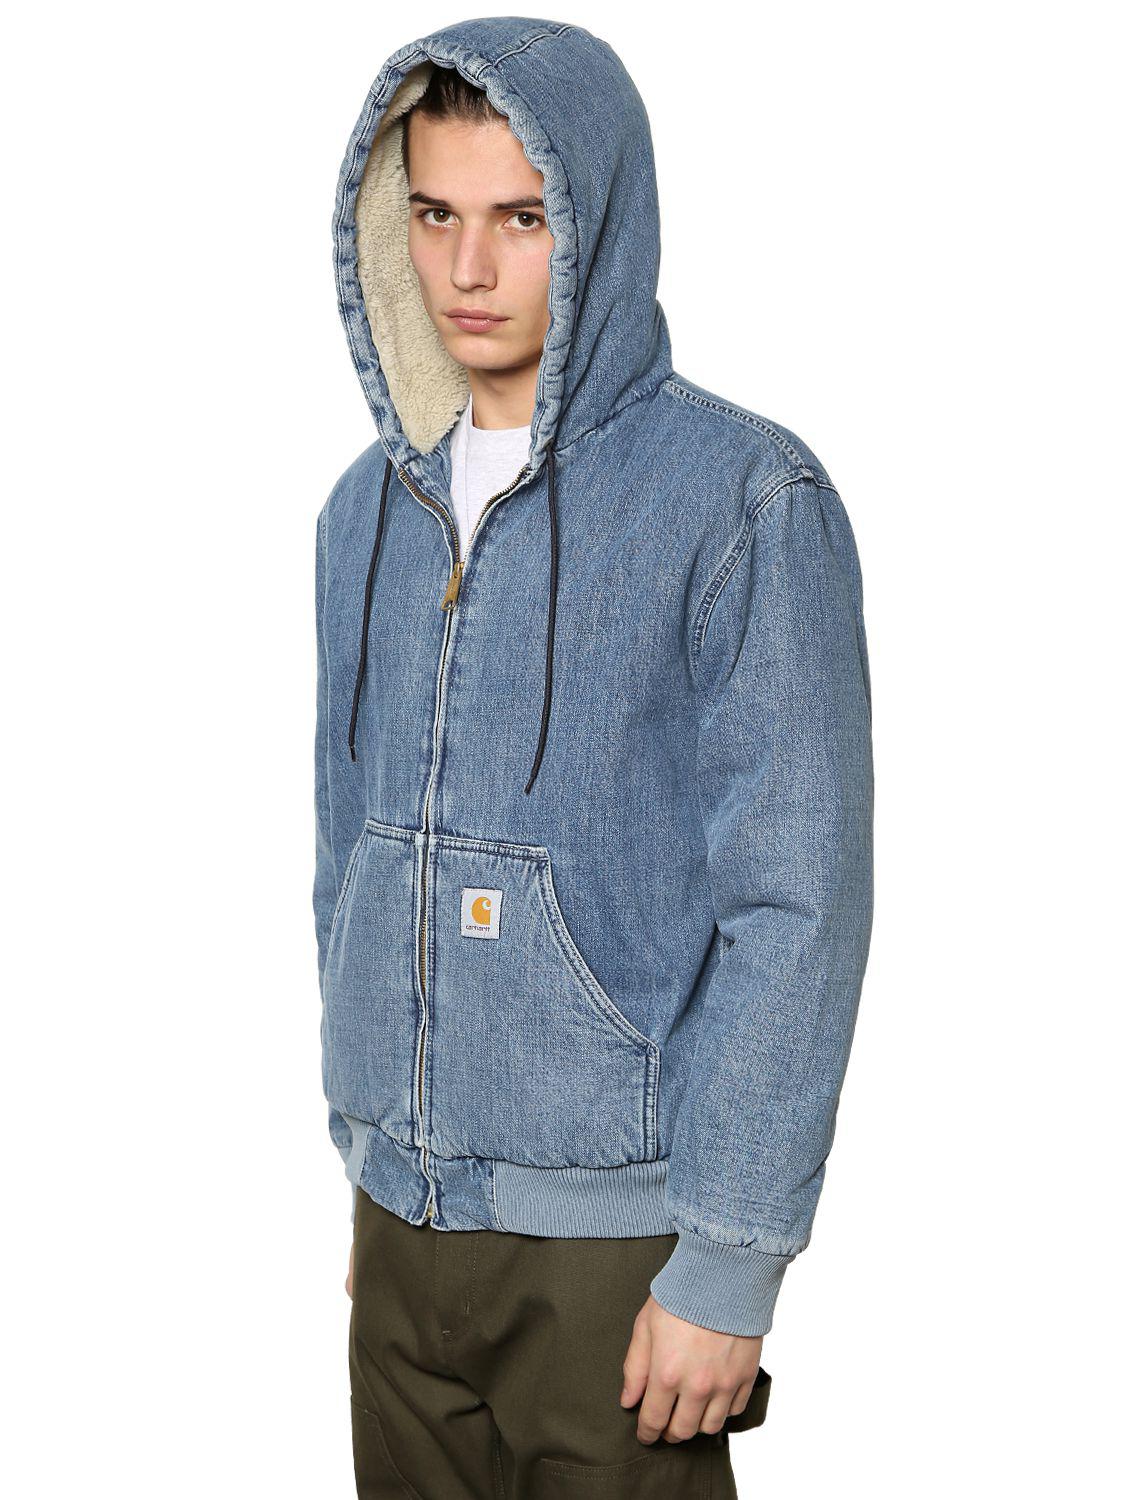 Carhartt Hooded Stone Washed Active Denim Jacket in Blue for Men - Lyst